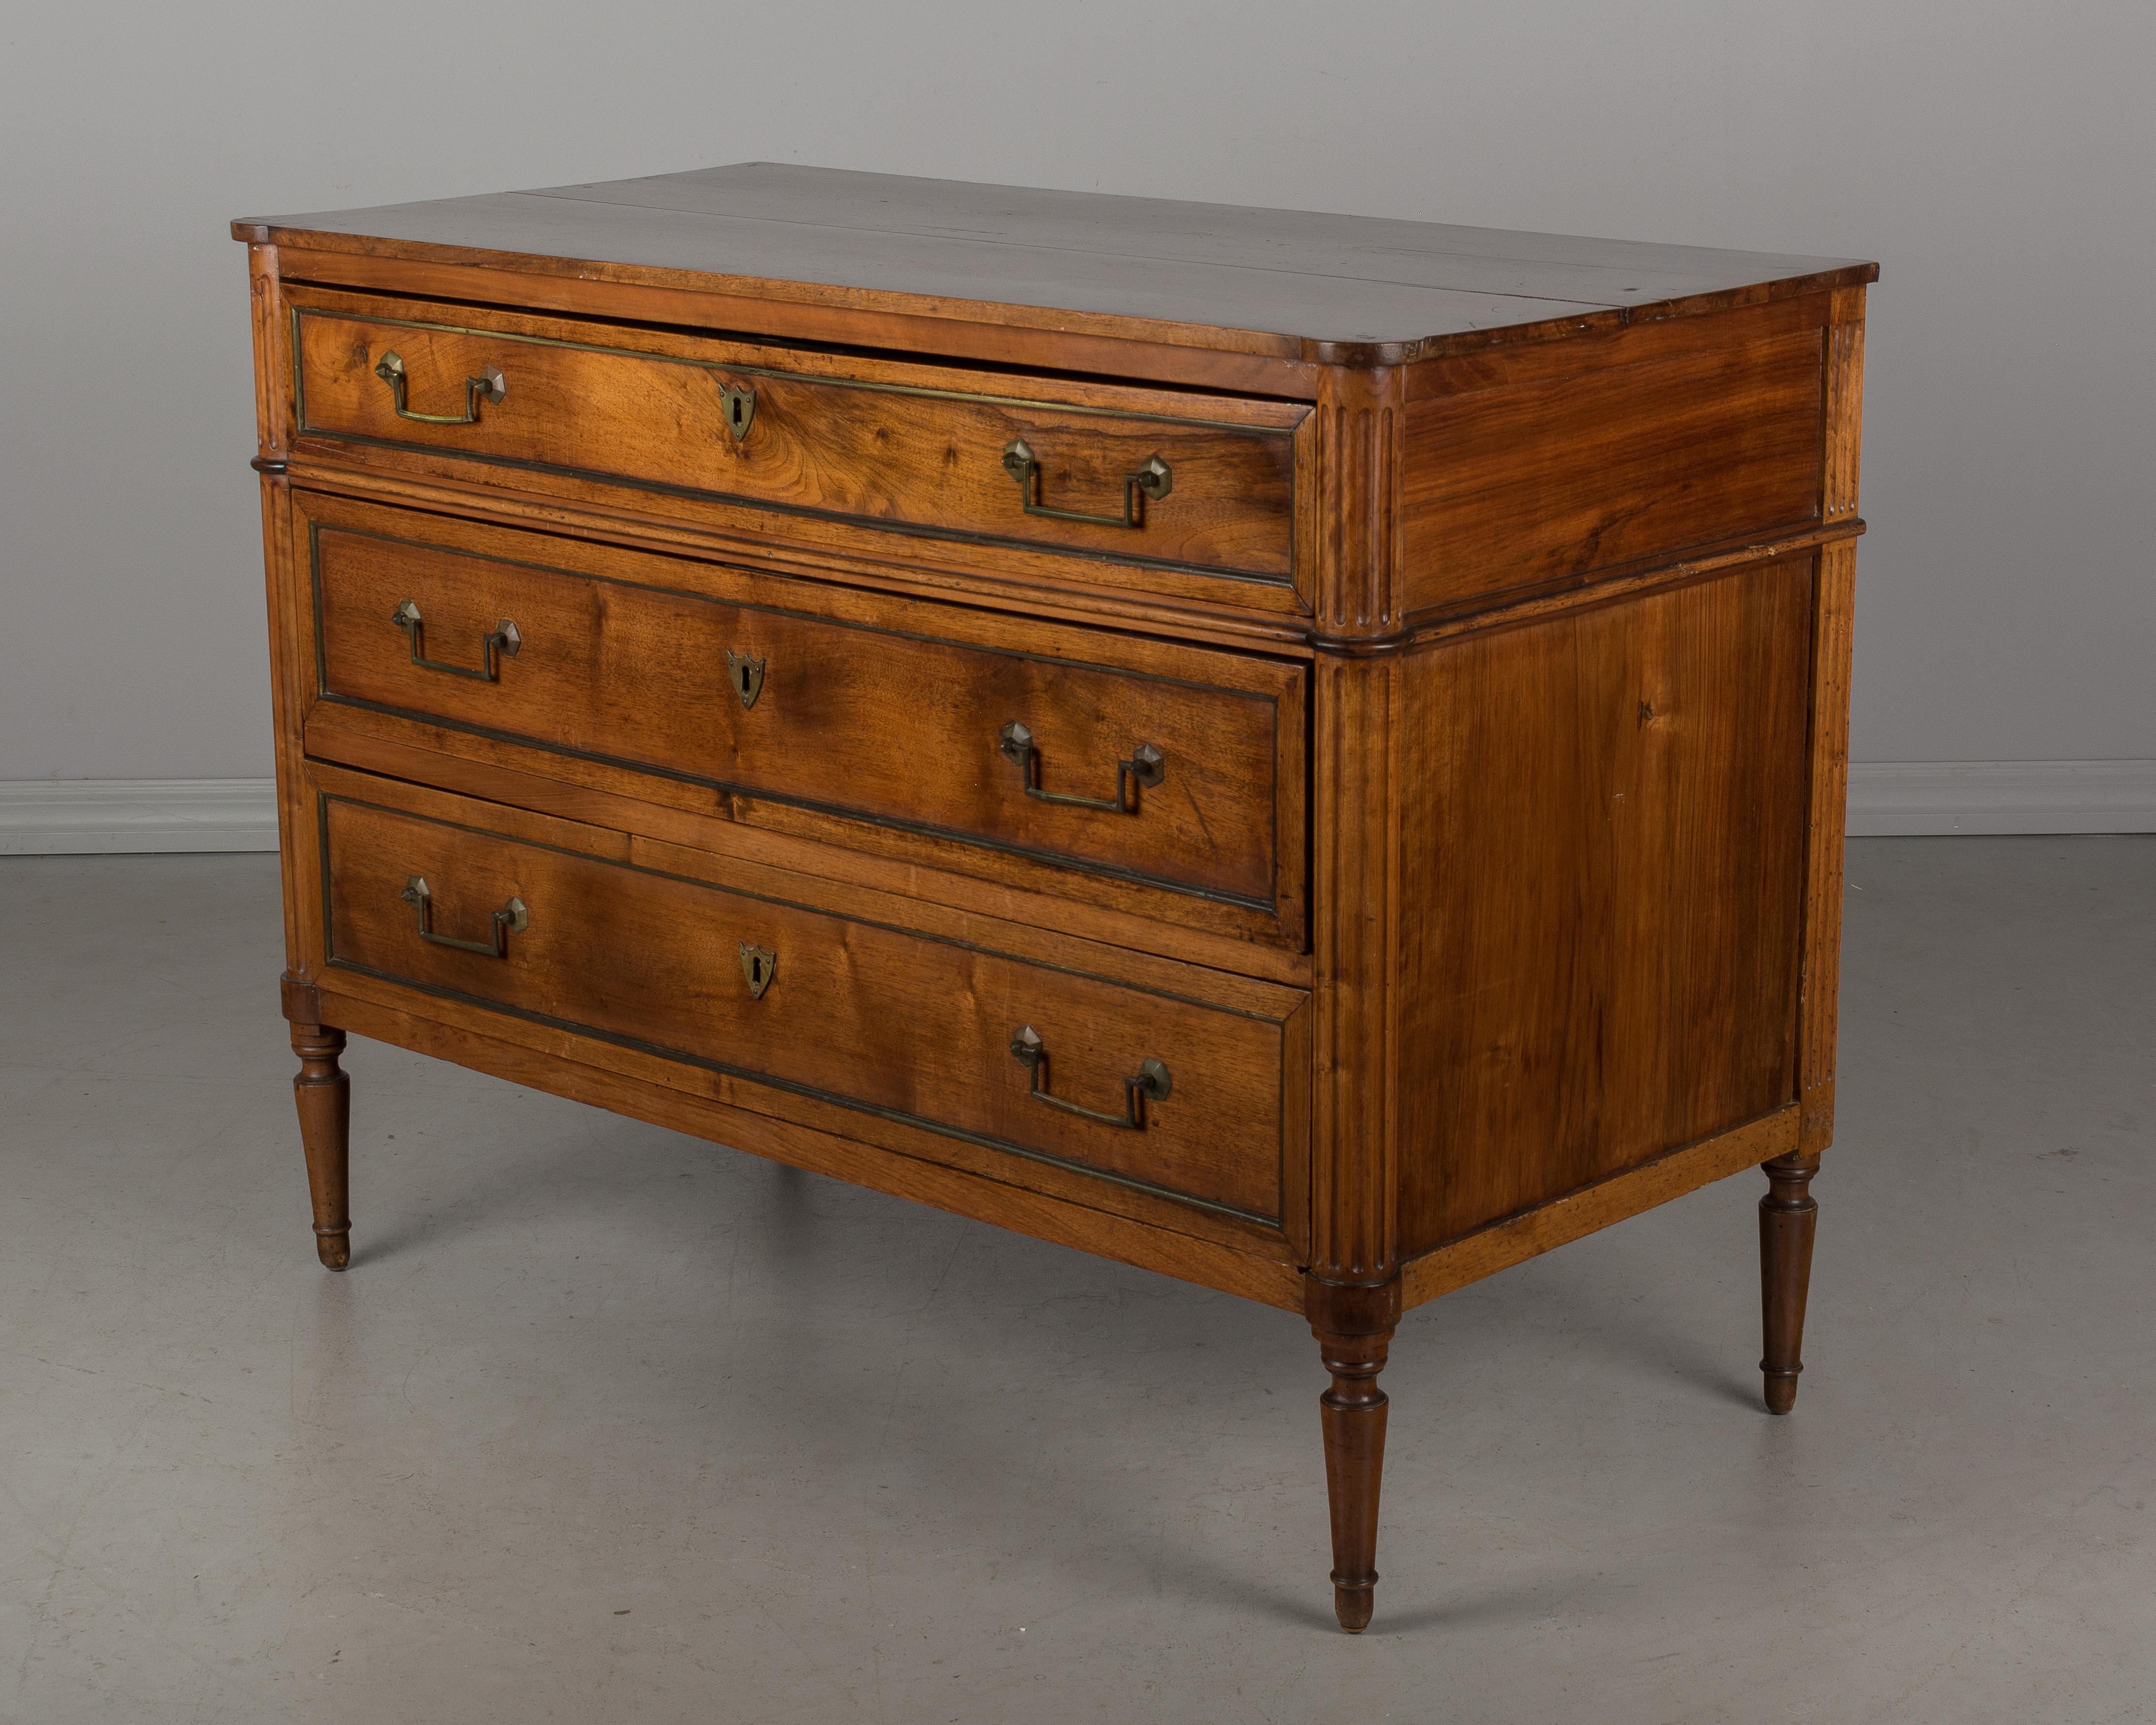 A 19th century French Louis XVI style commode made of solid walnut. Three dovetailed drawers with original brass trim, pulls and escutcheons. There are no locks or keys. Fluted corners with shaped top. Pegged construction. Top drawer is slightly